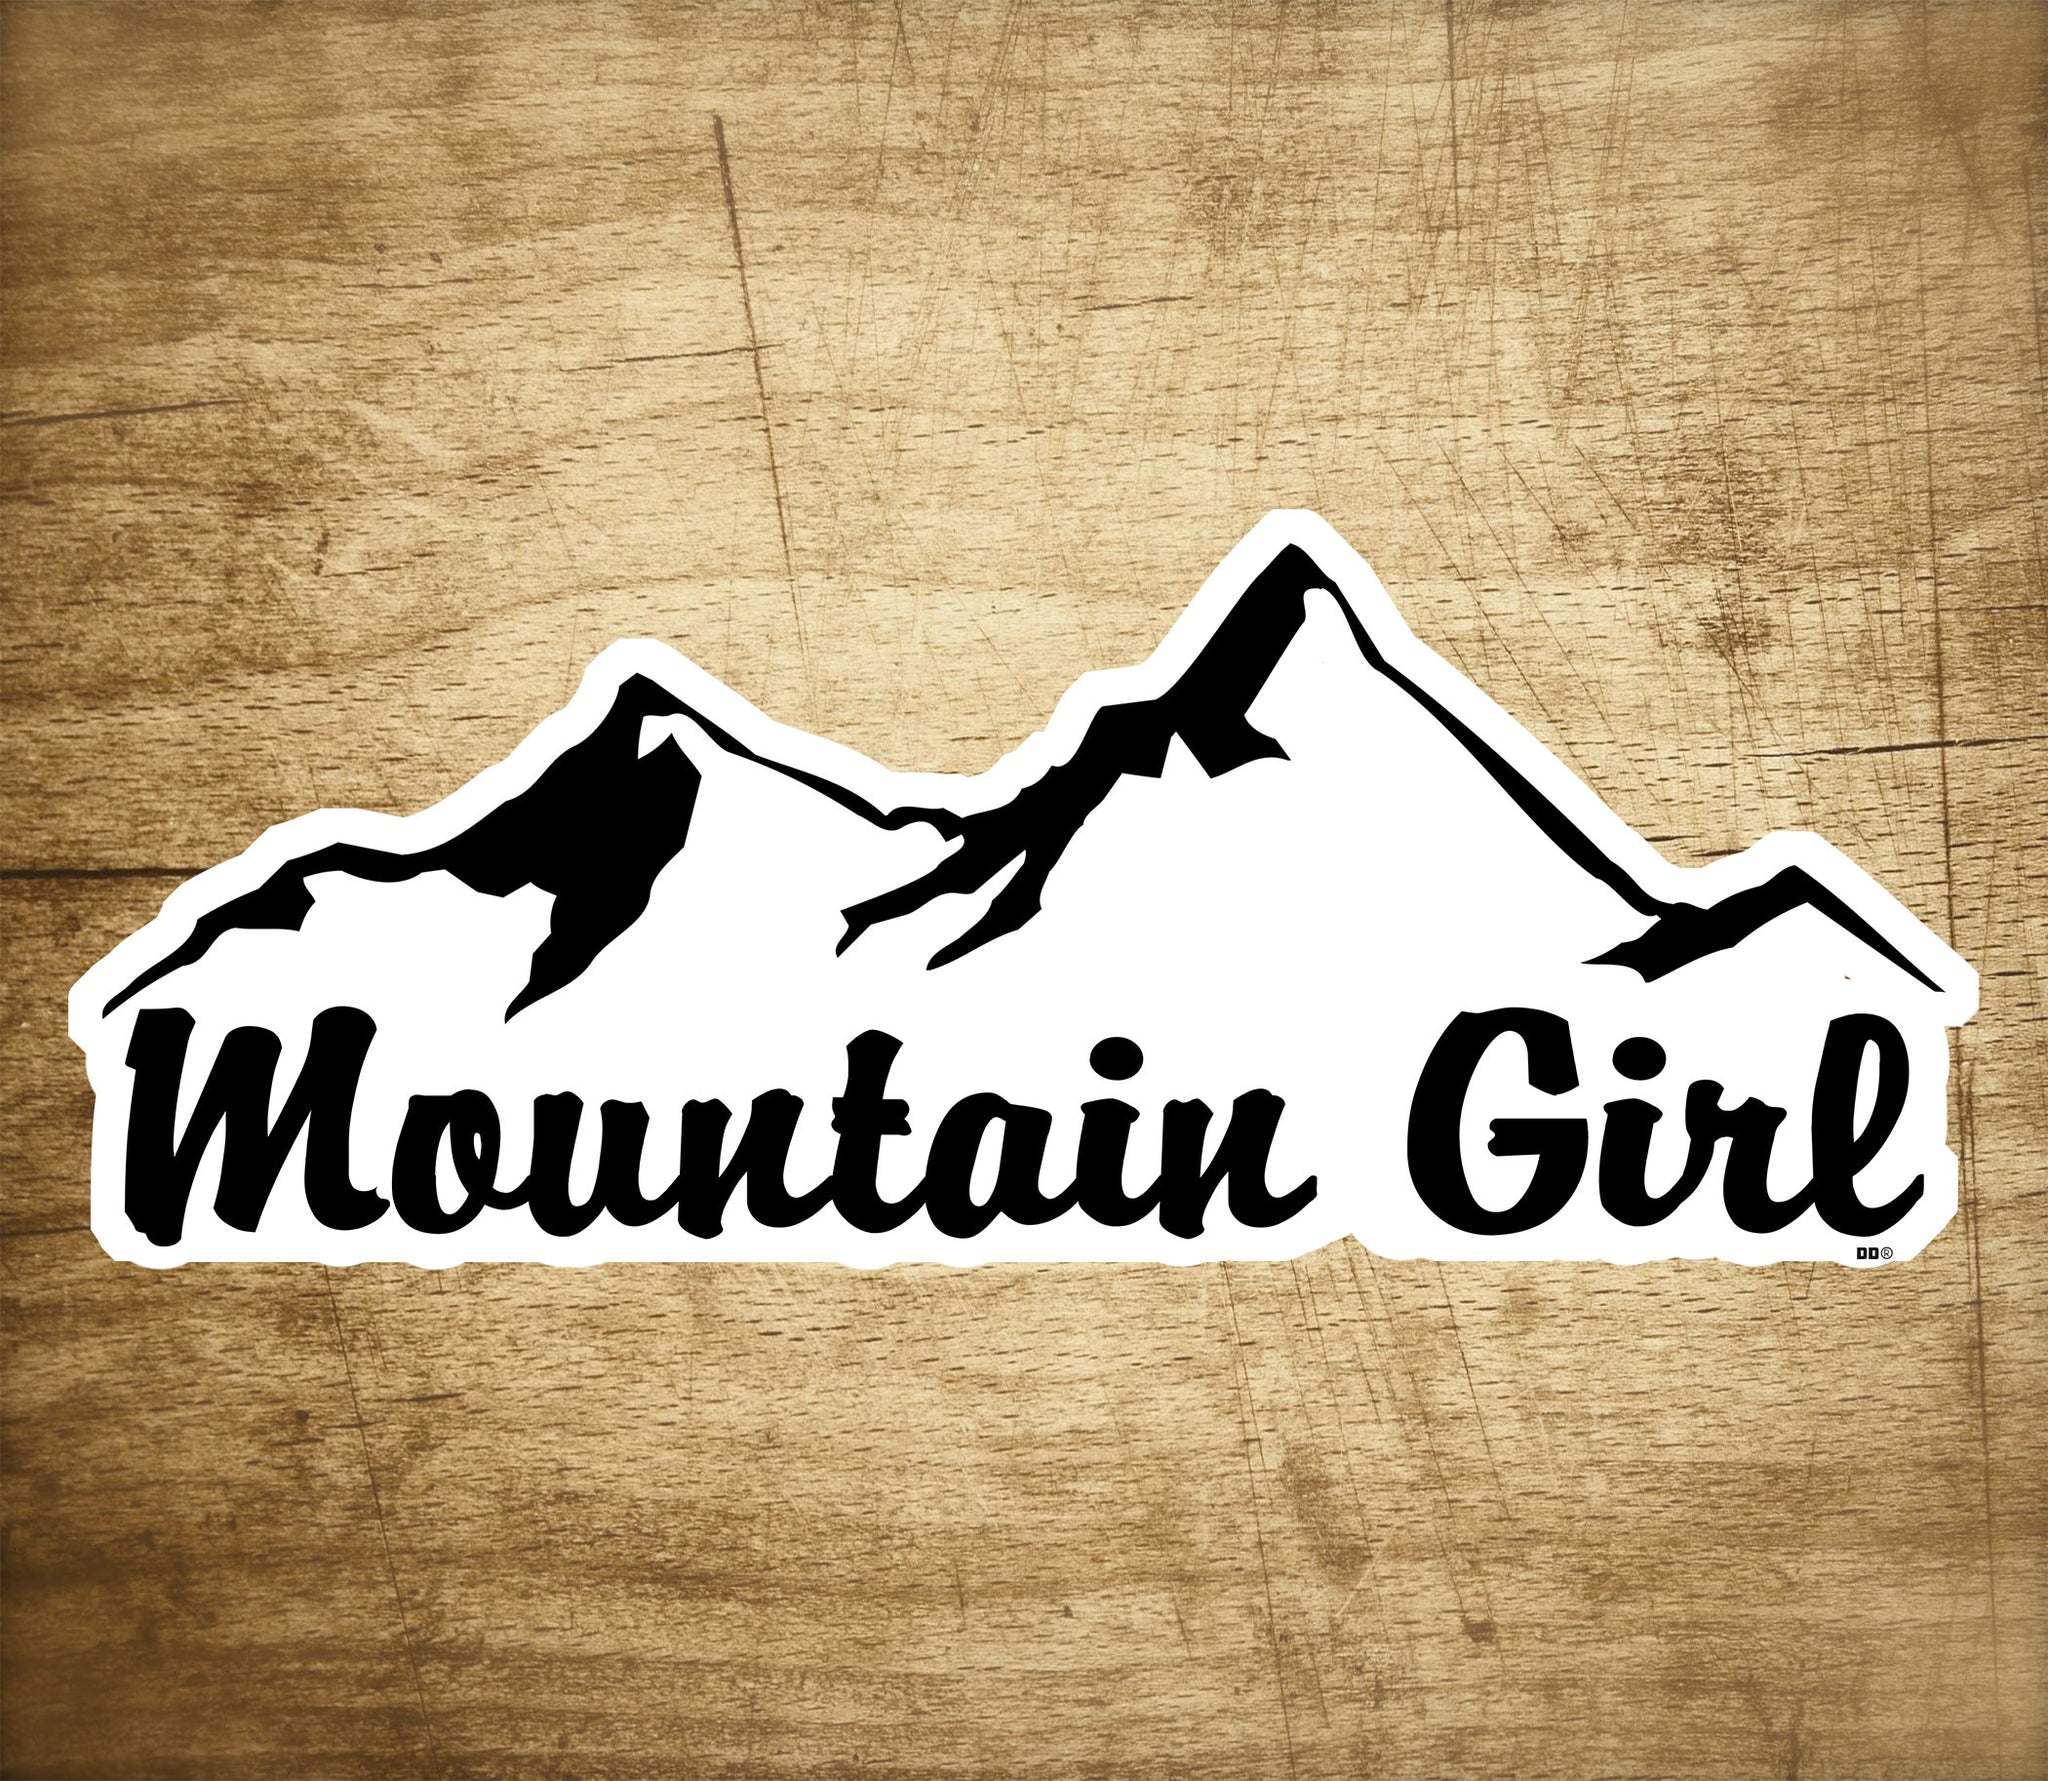 Mountain Girl Decal 3.75" Sticker Hiking Camping Skiing Ski Hike Camp Outdoors Park Forest Nature